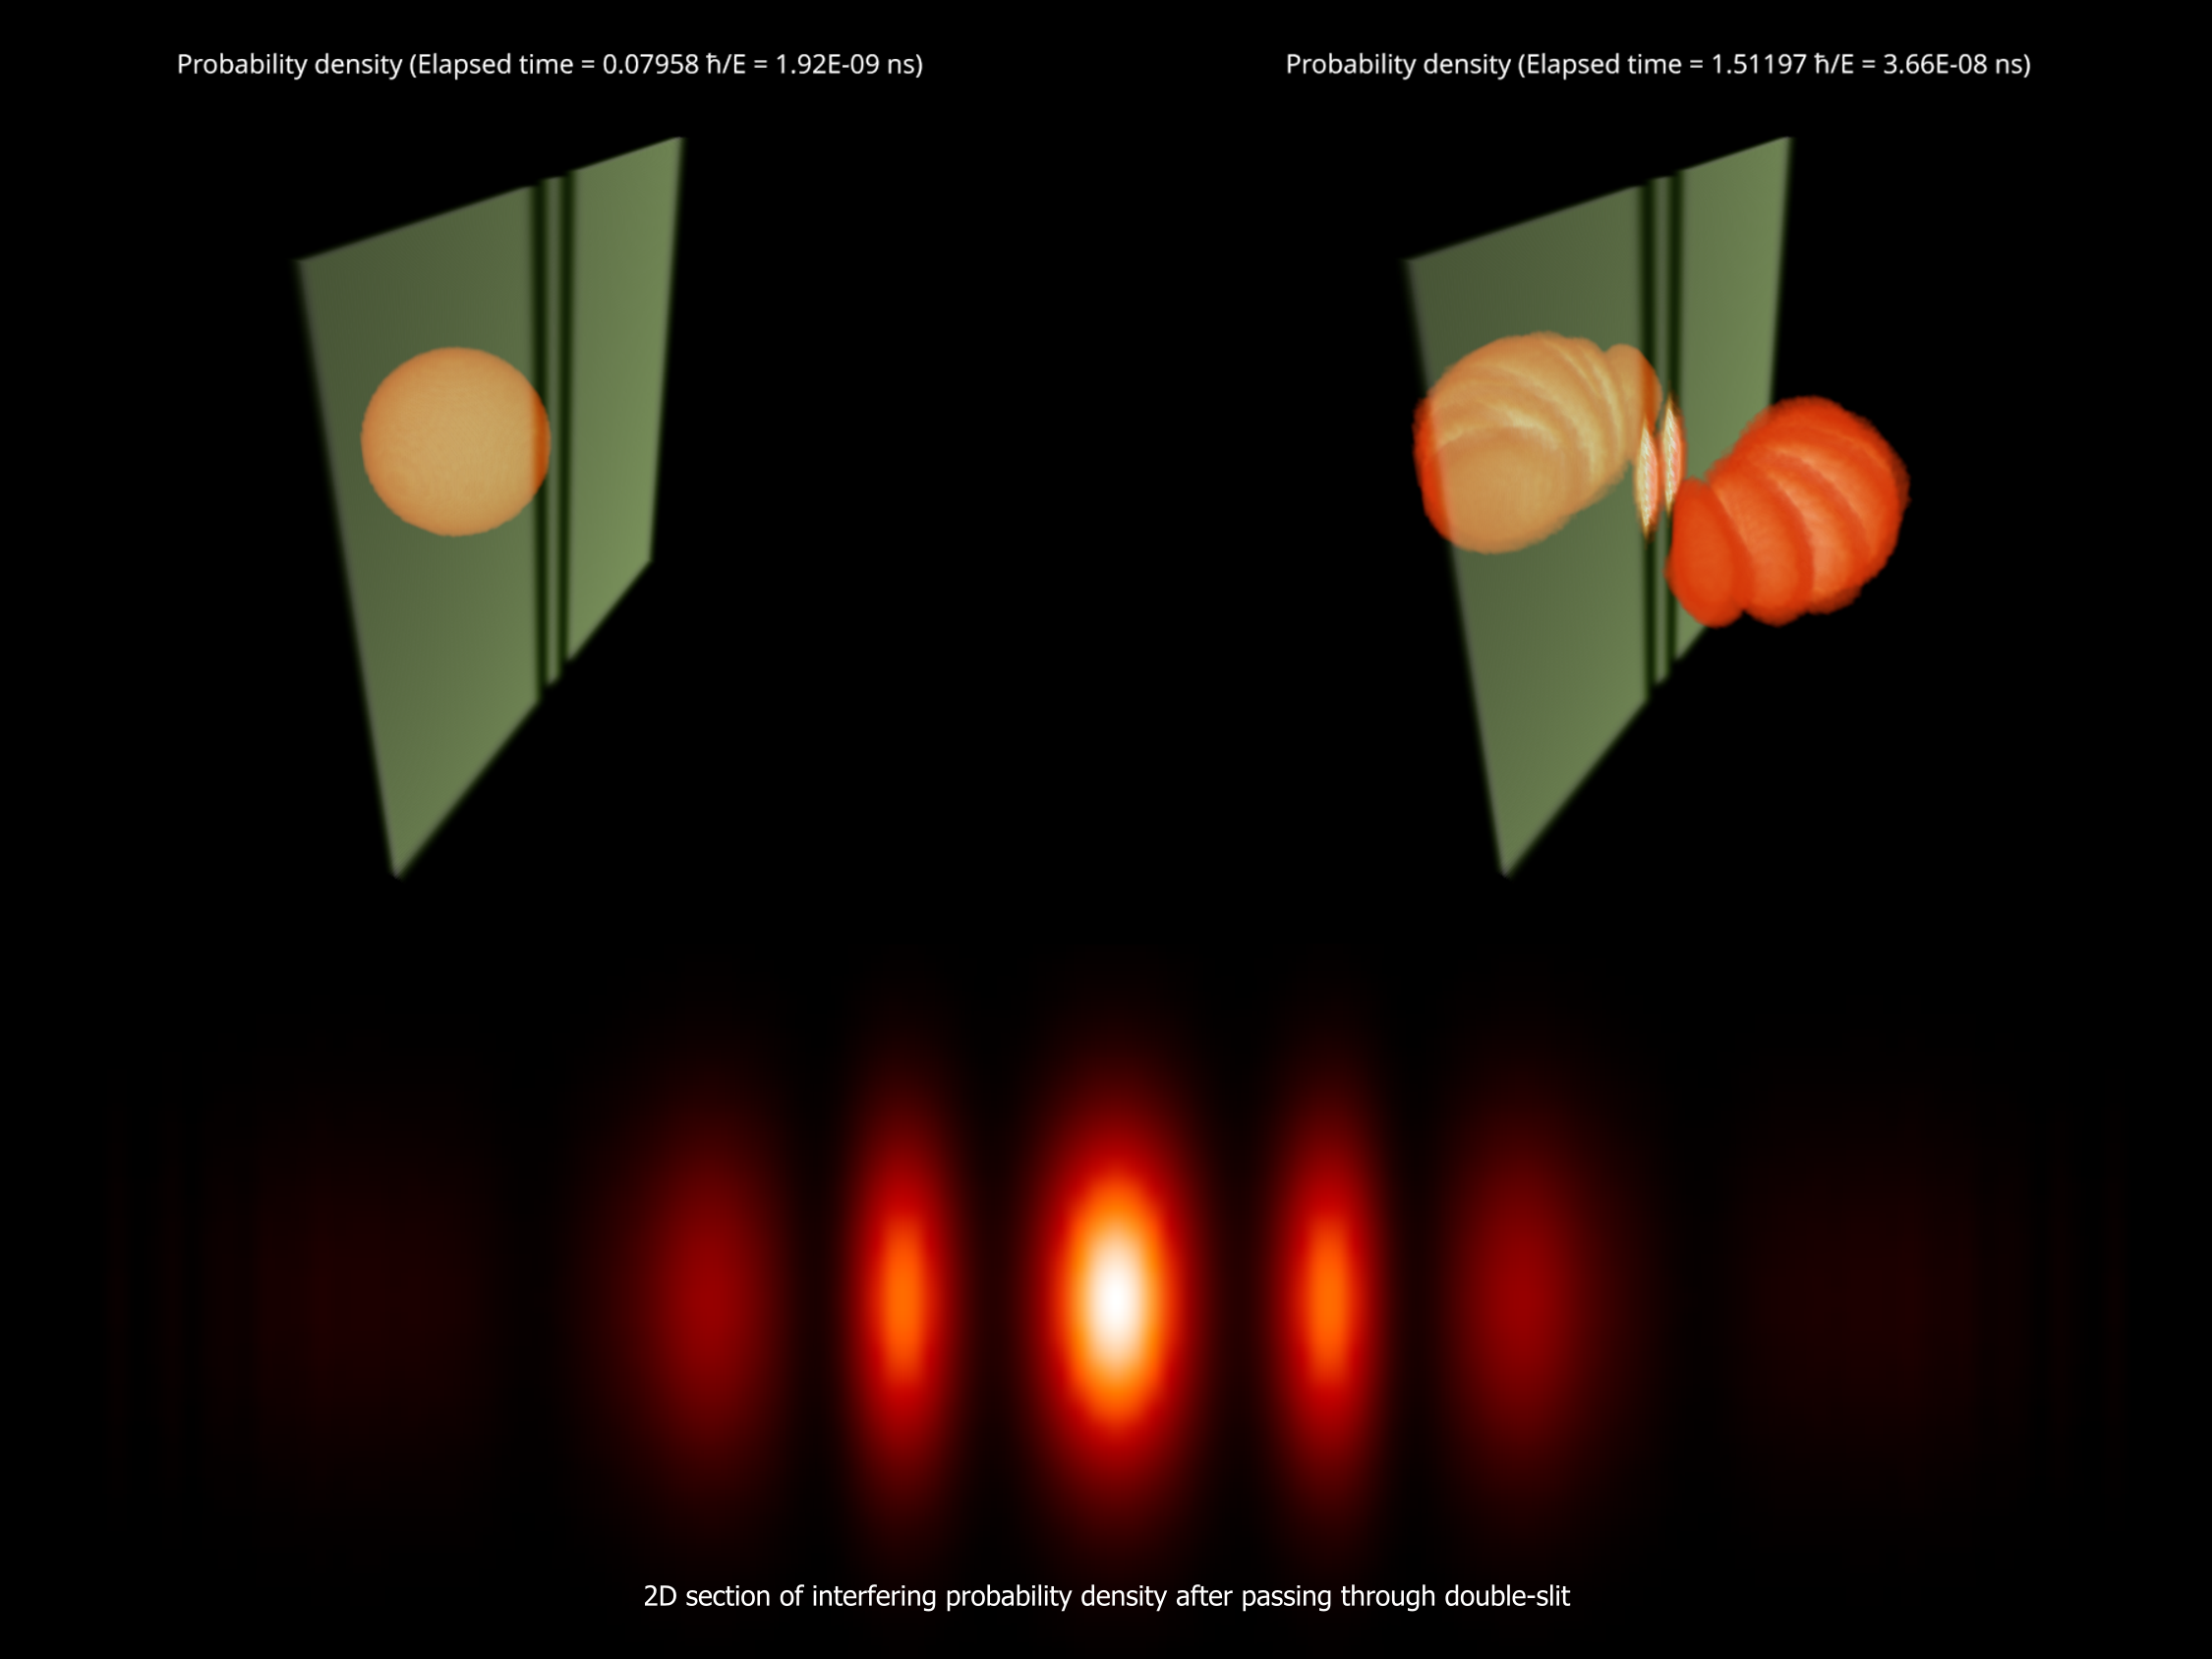 Simulation of the double-slit experiment